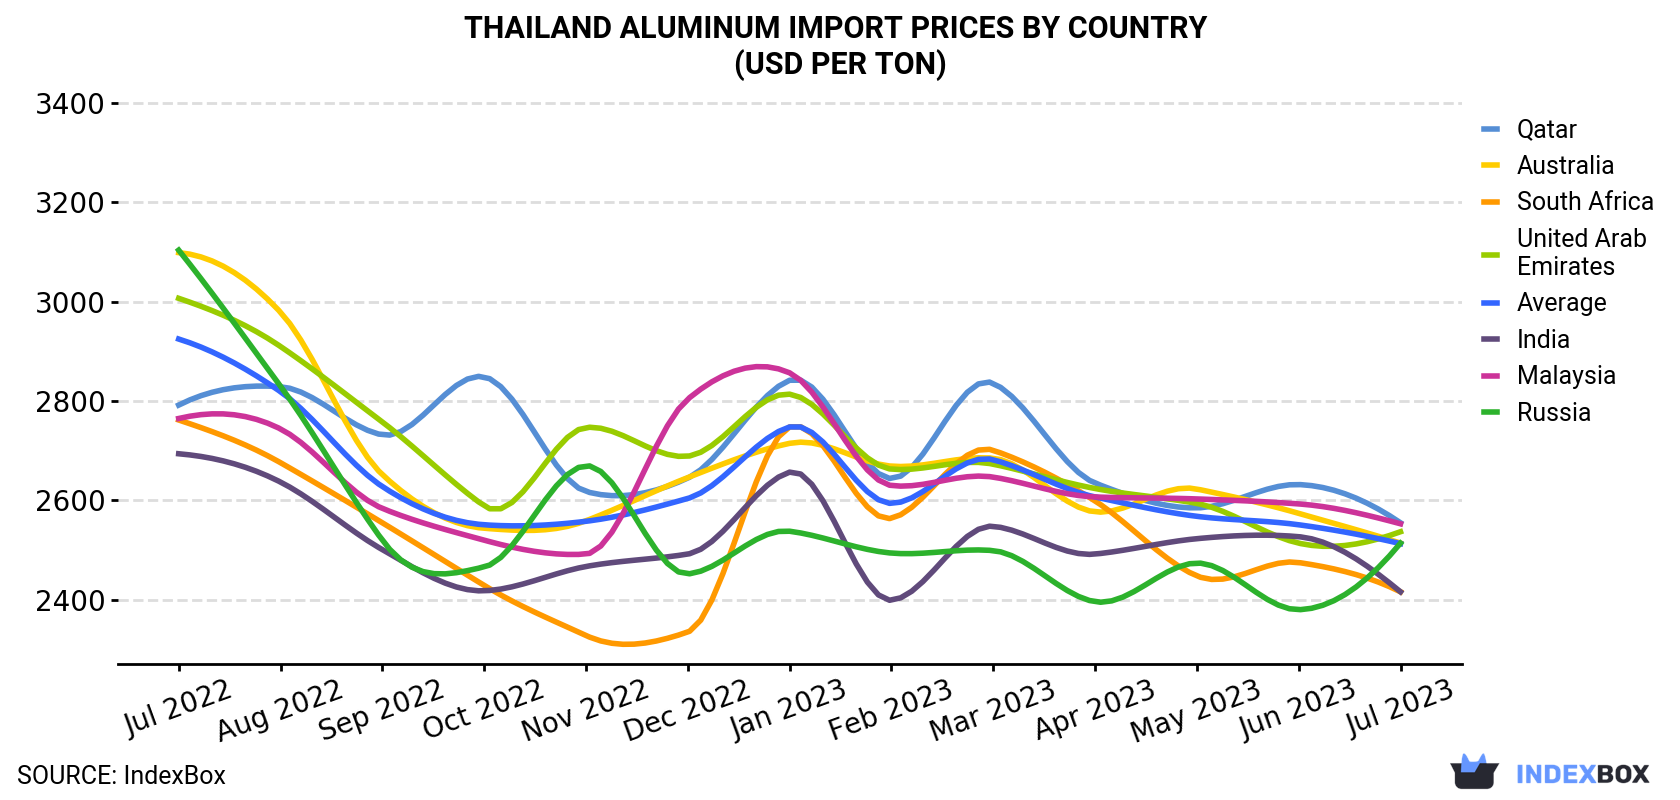 Thailand Aluminum Import Prices By Country (USD Per Ton)